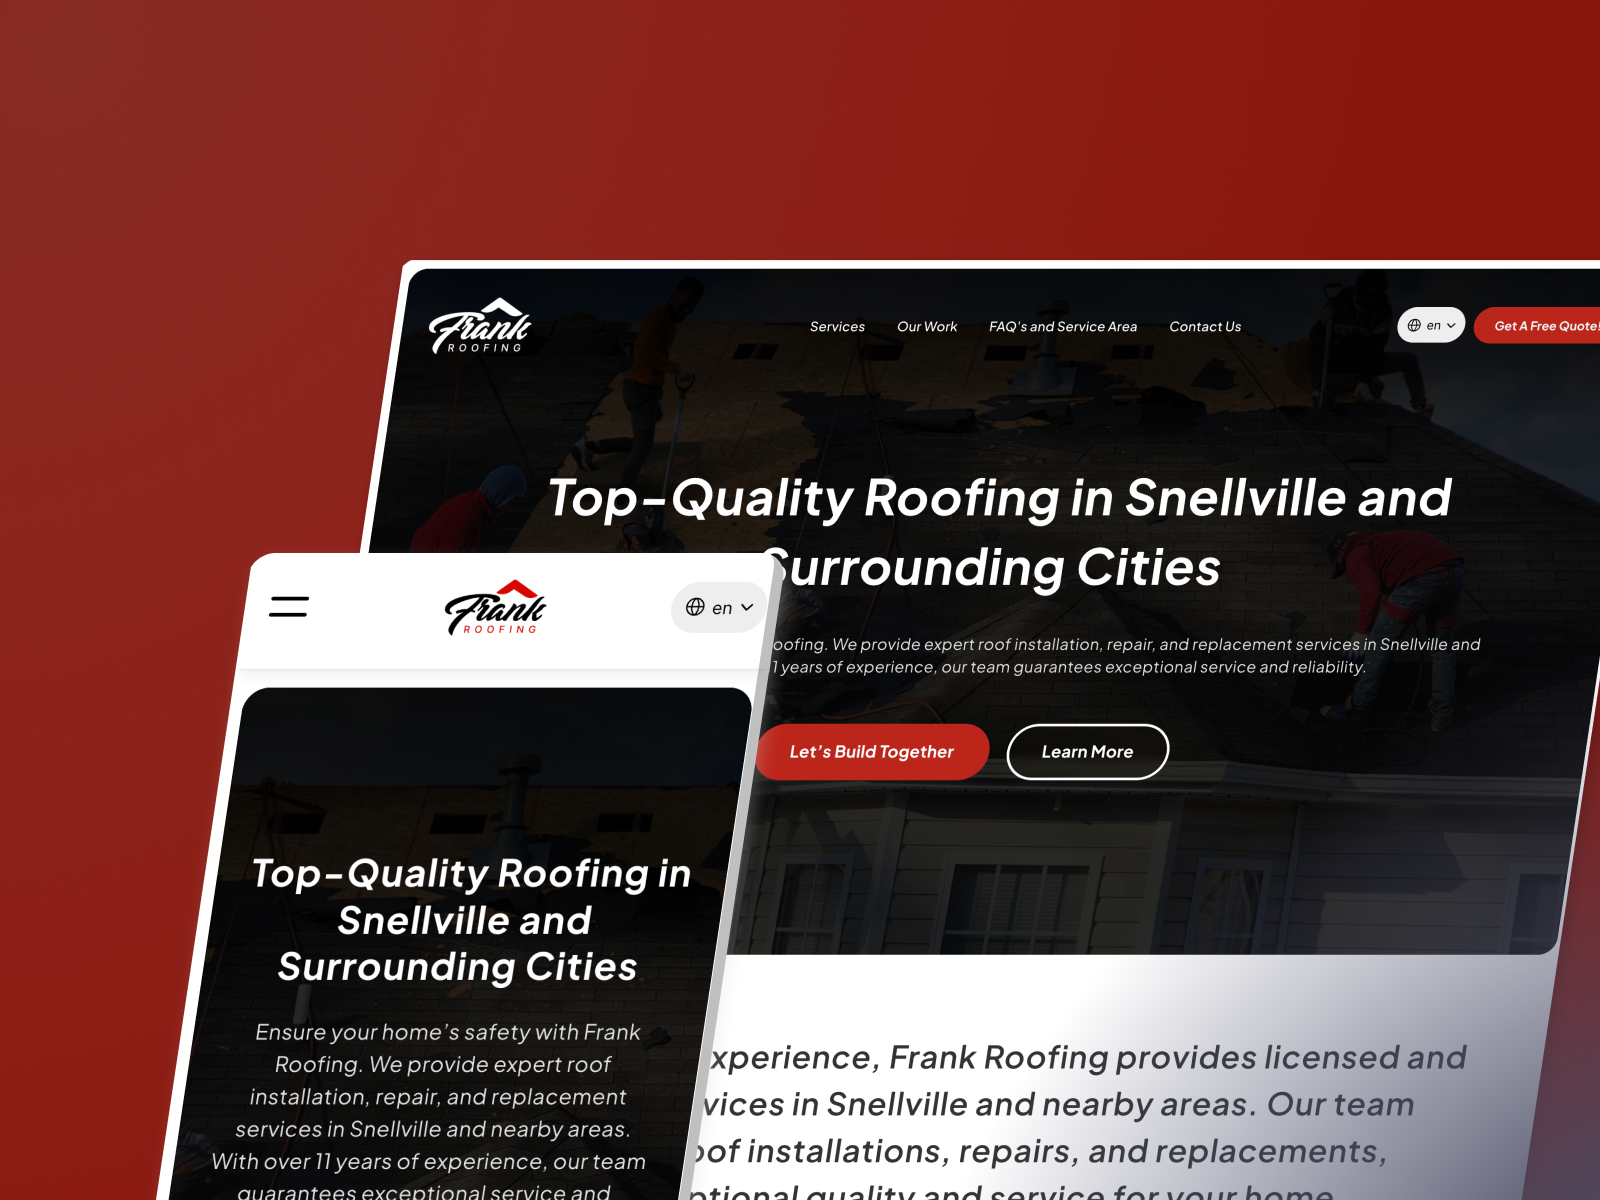 Designed and developed the Frank Roofing website, enhancing SEO to improve search visibility and managing targeted email marketing campaigns to boost client engagement.By GG Studio - Geek Guys Studio